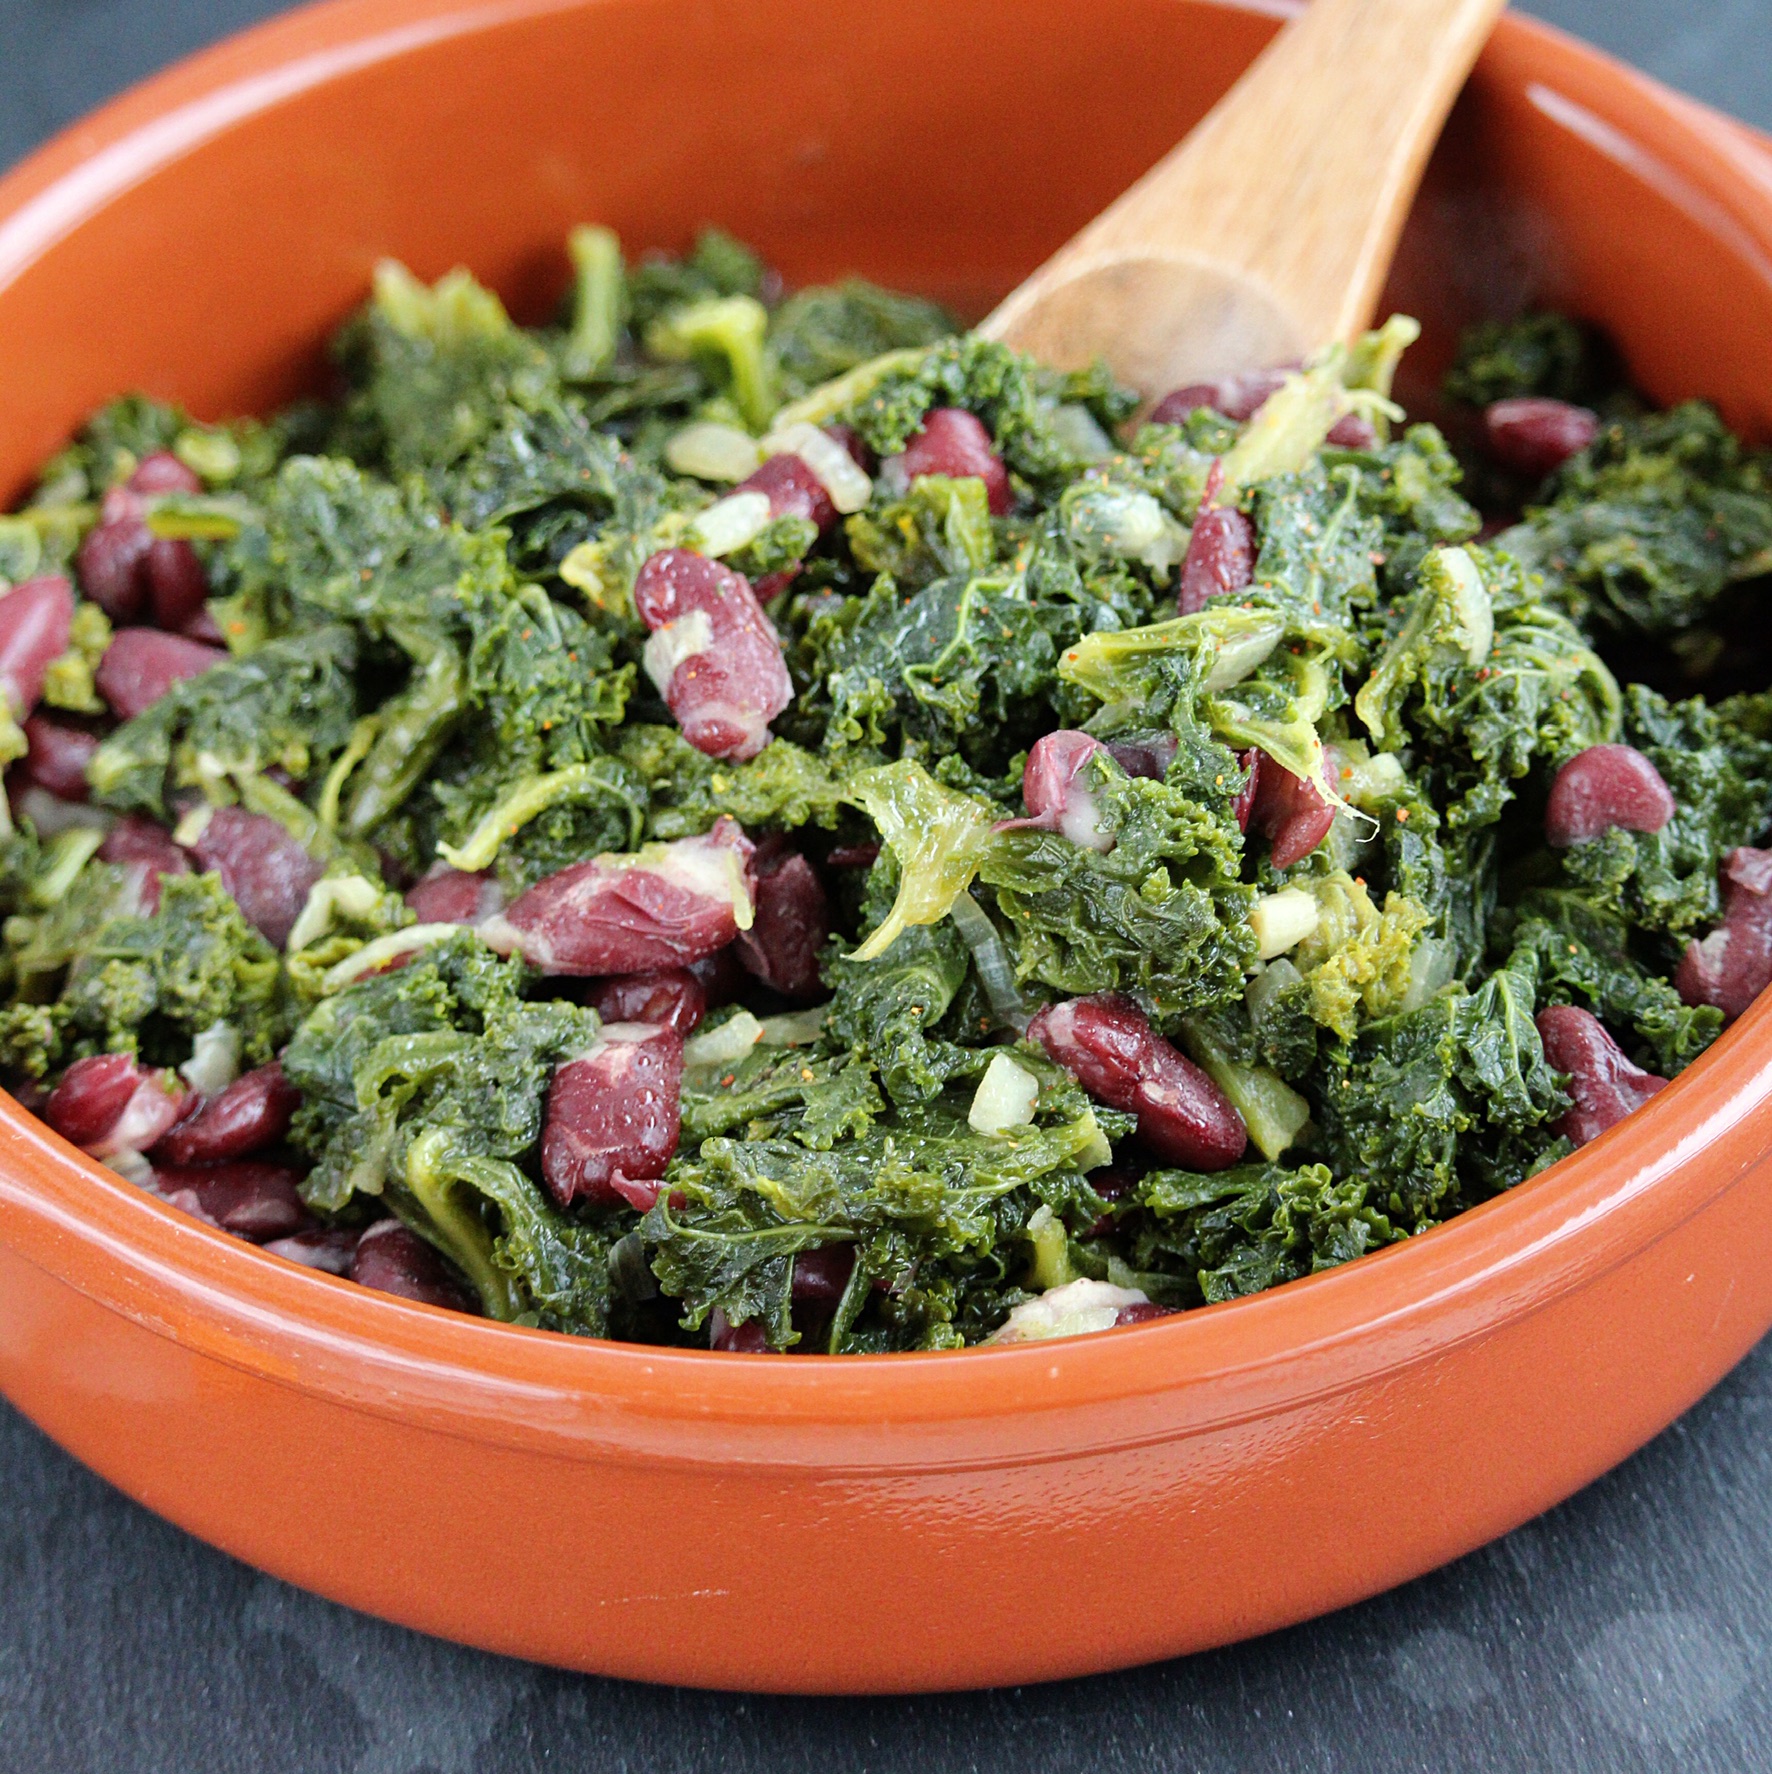 Braised Kale and Beans